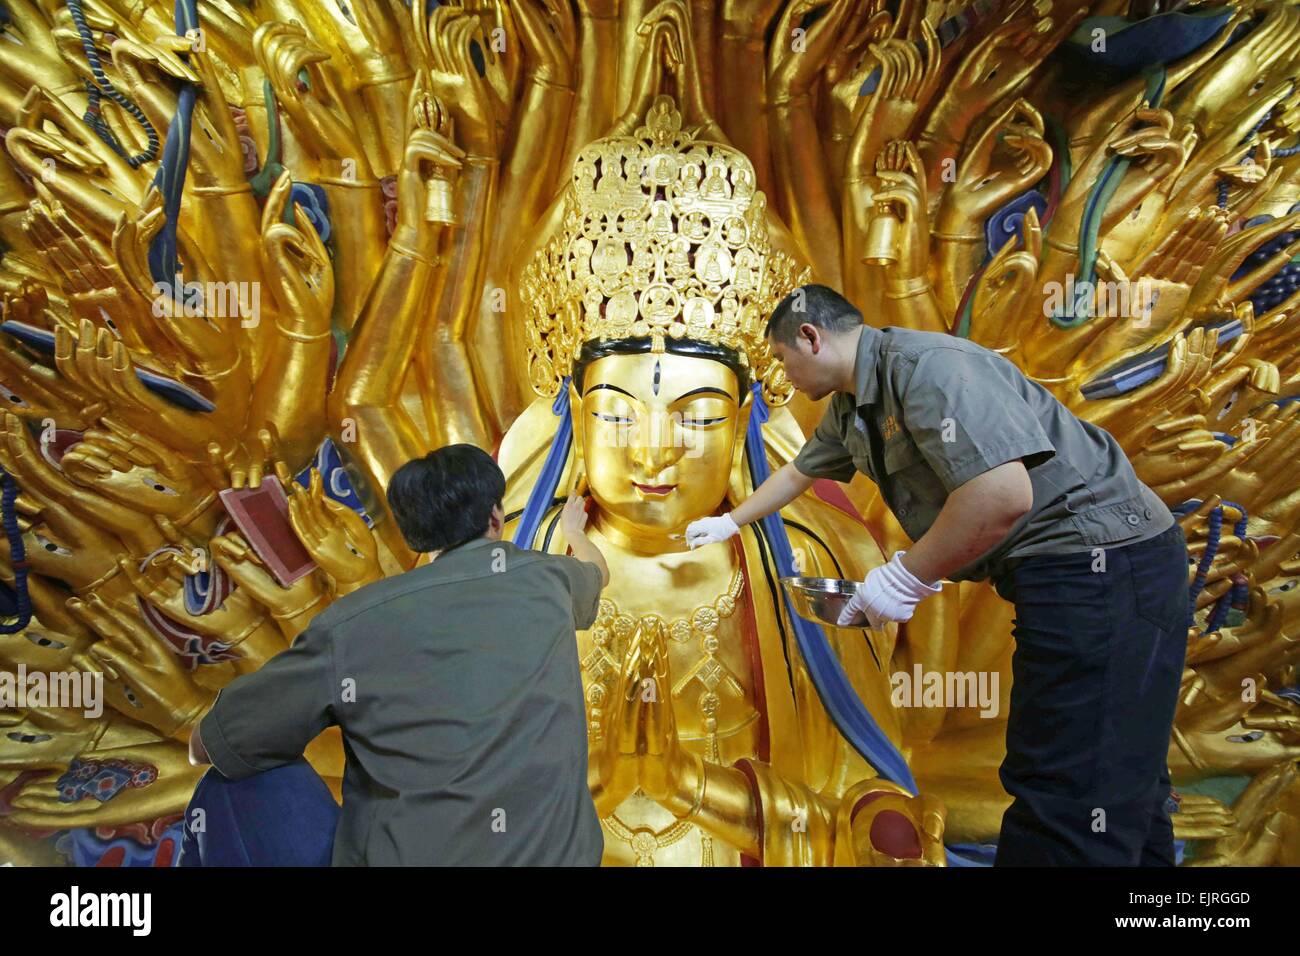 Chongqing, China. 31st Mar, 2015. Workers restore a sculpture of Qianshou Guanyin (bodhisattva with a thousand hands) on Mount Baoding in Dazu District in the municipality of Chongqing, southwest China, March 31, 2015. The sculpture with gold foil, carved in the cave with 7.7 meters high and 12.5 meters wide, could date back to Southern Song Dynasty (1127 to 1279). The restoration work has entered the final phase and is supposed to be finished in June this year, after which the sculpture will be reopened to public. © Luo Guojia/Xinhua/Alamy Live News Stock Photo